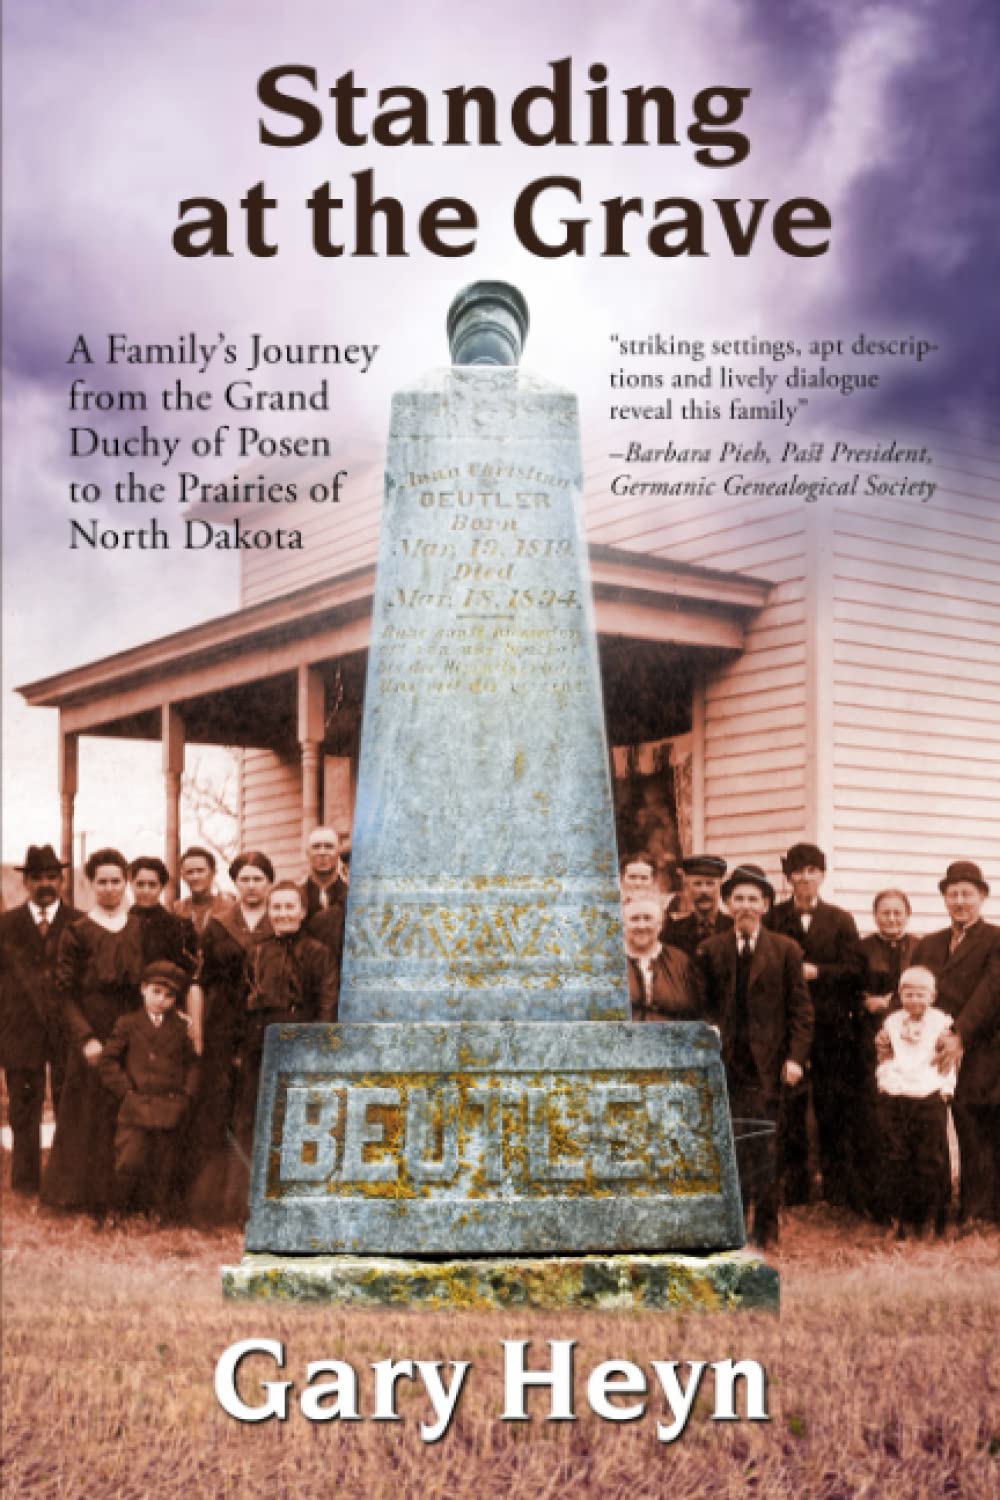 Standing at the Grave: A Family's Journey from the Grand Duchy of Posen to the Prairies of North Dakota